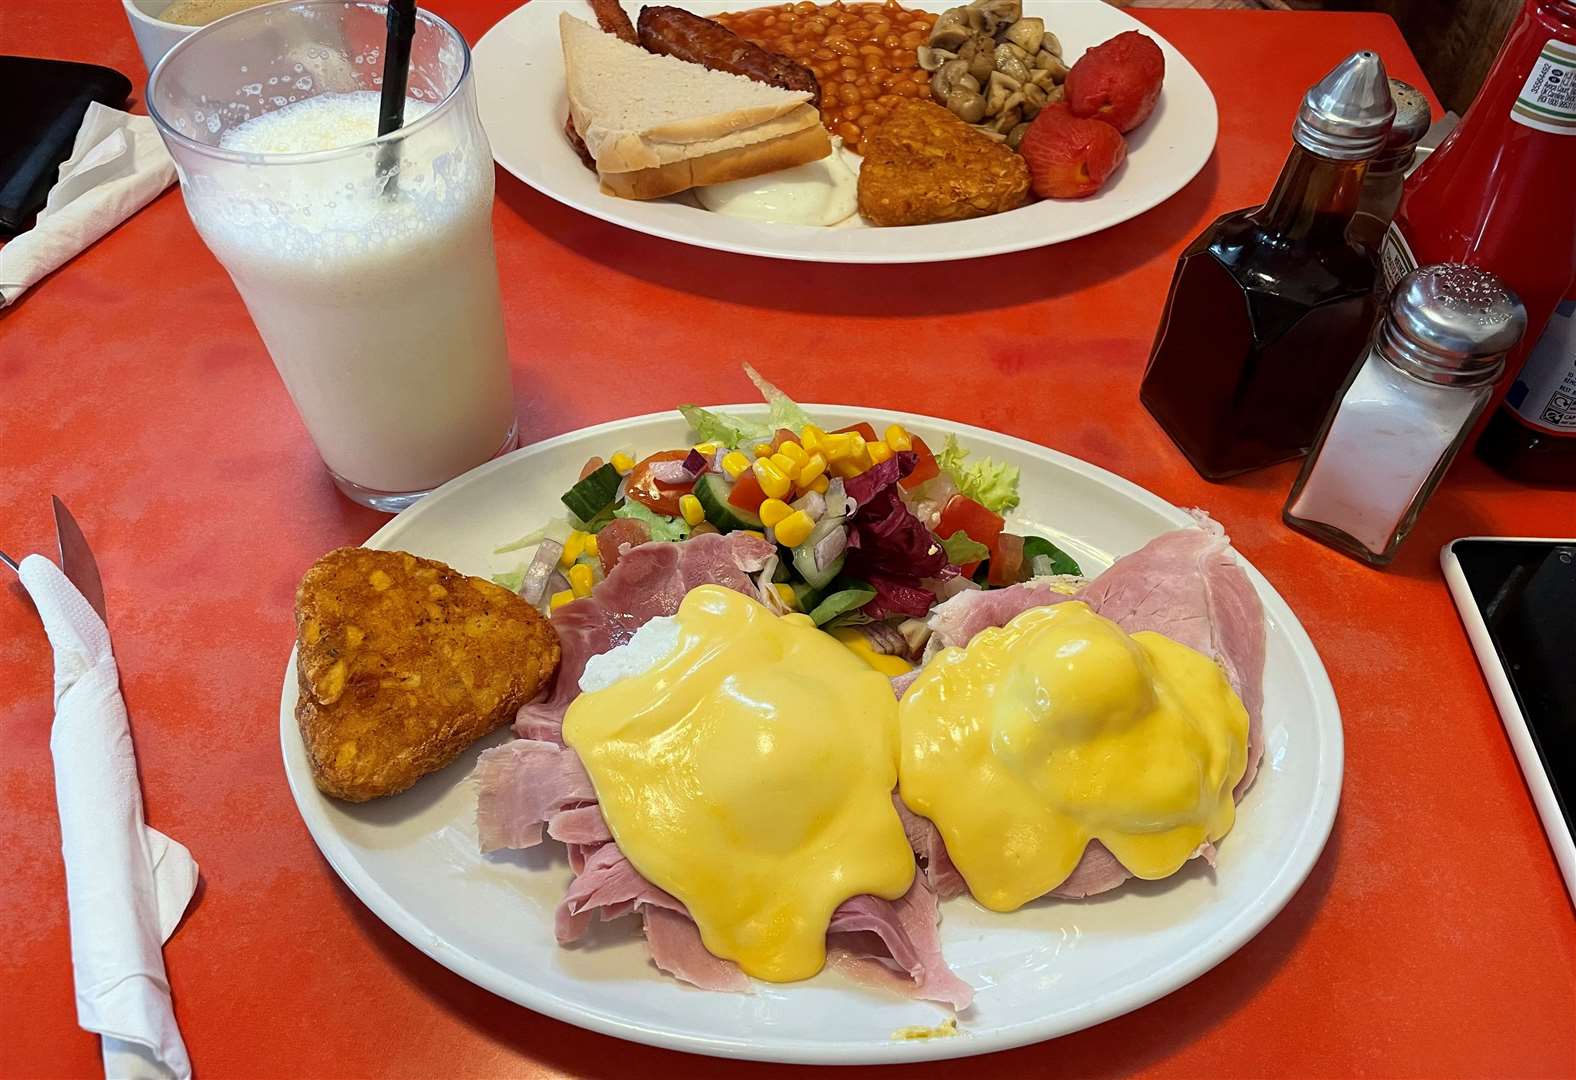 The eggs benedict and sweetcorn salad